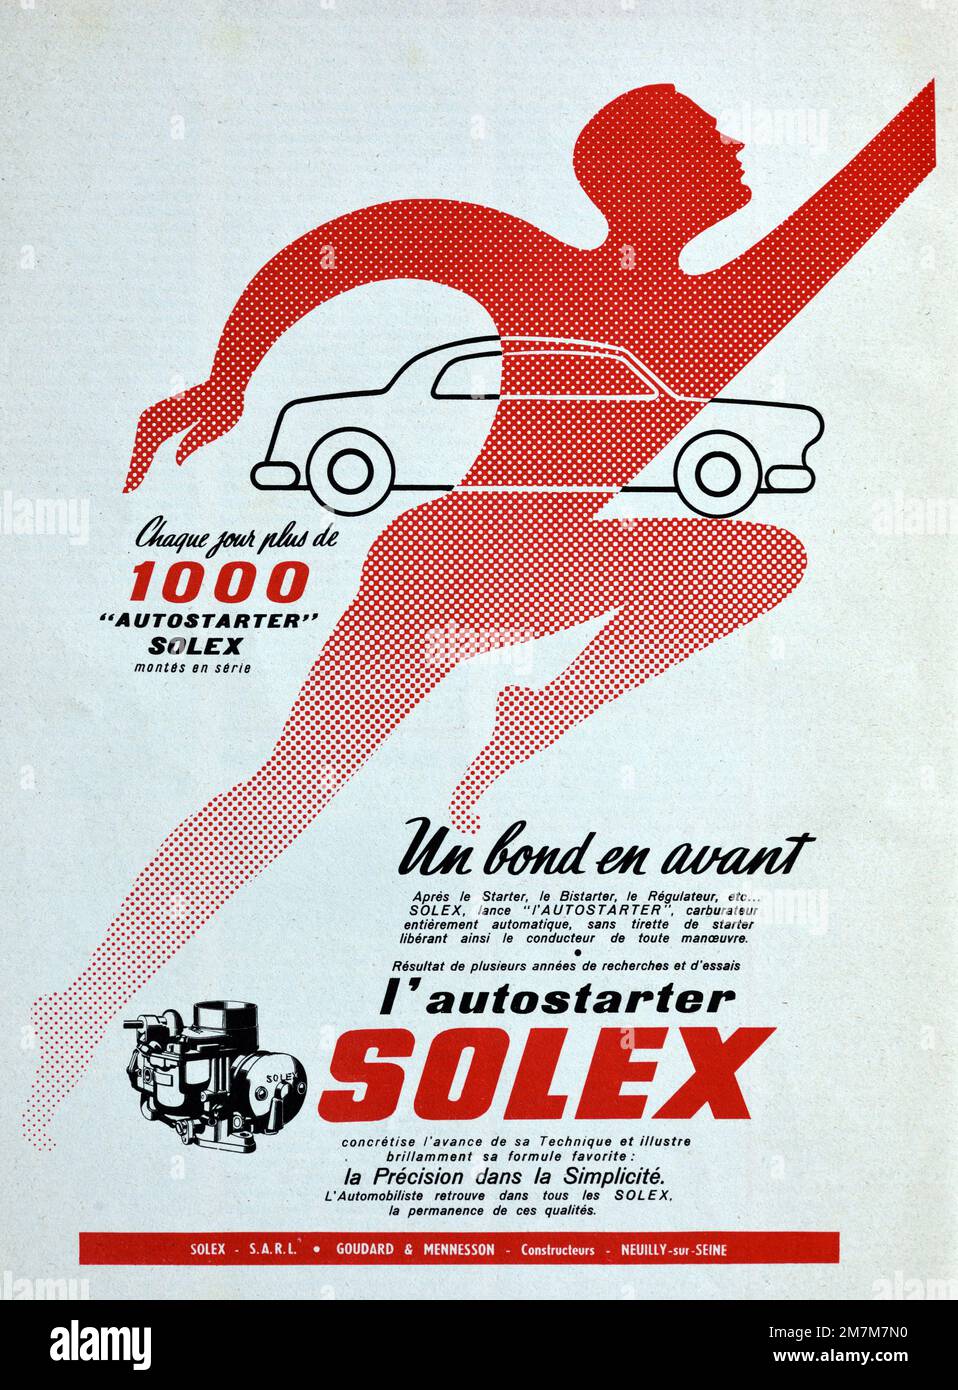 Vintage or Old Advert, Advertisement, Publicity or Illustration for Solex Carbureters or Carrburreters Advert 1956 Illustrated with image of Running Man, Sprinting Man or Sprinter Stock Photo